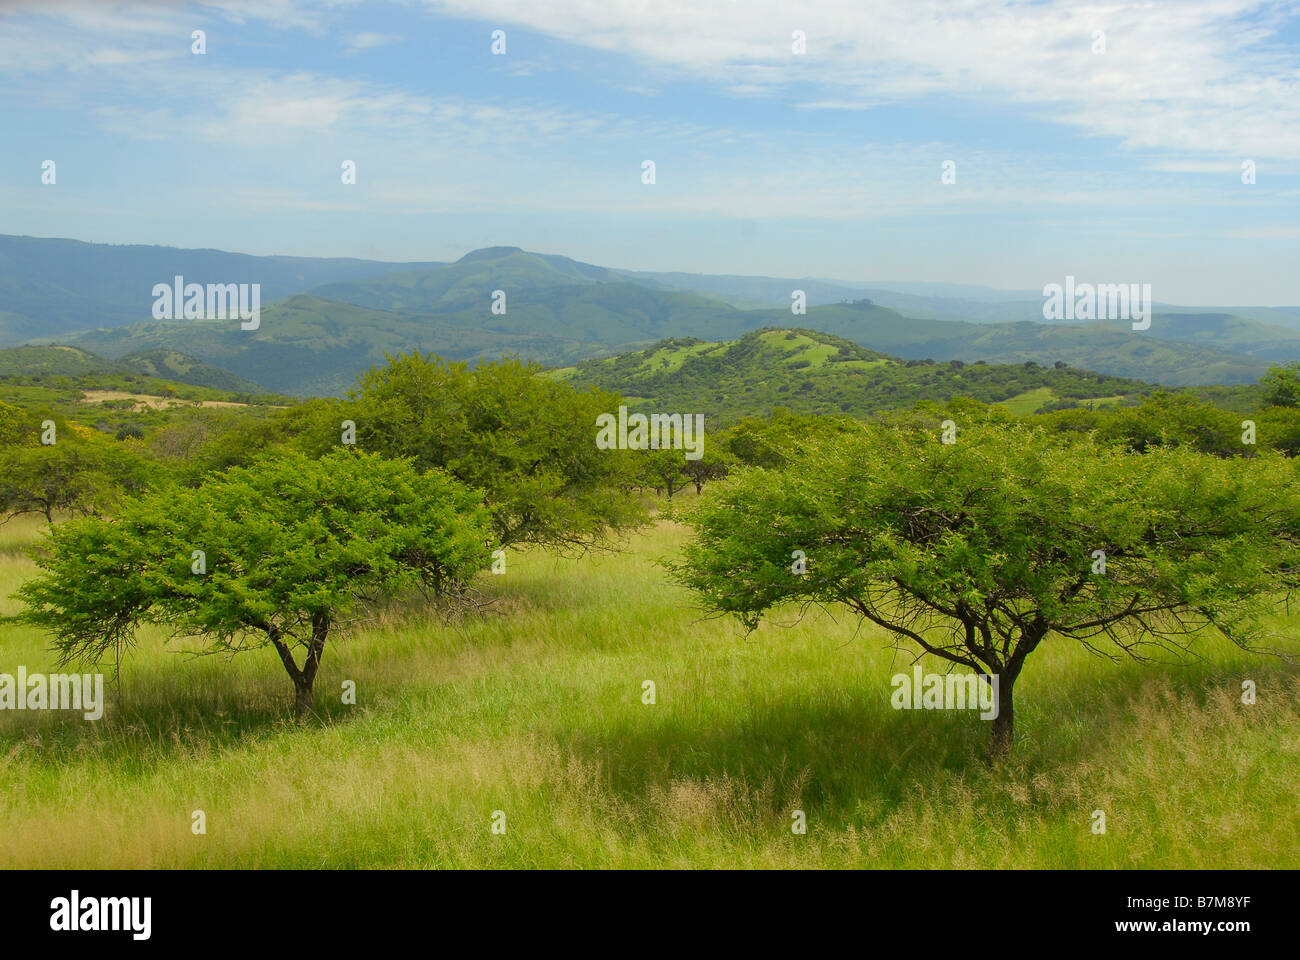 Acacia woodland on the foothills of the Drakensberg mountains, near Richmond and Ixopo in Kwazulu Natal, South Africa Stock Photo